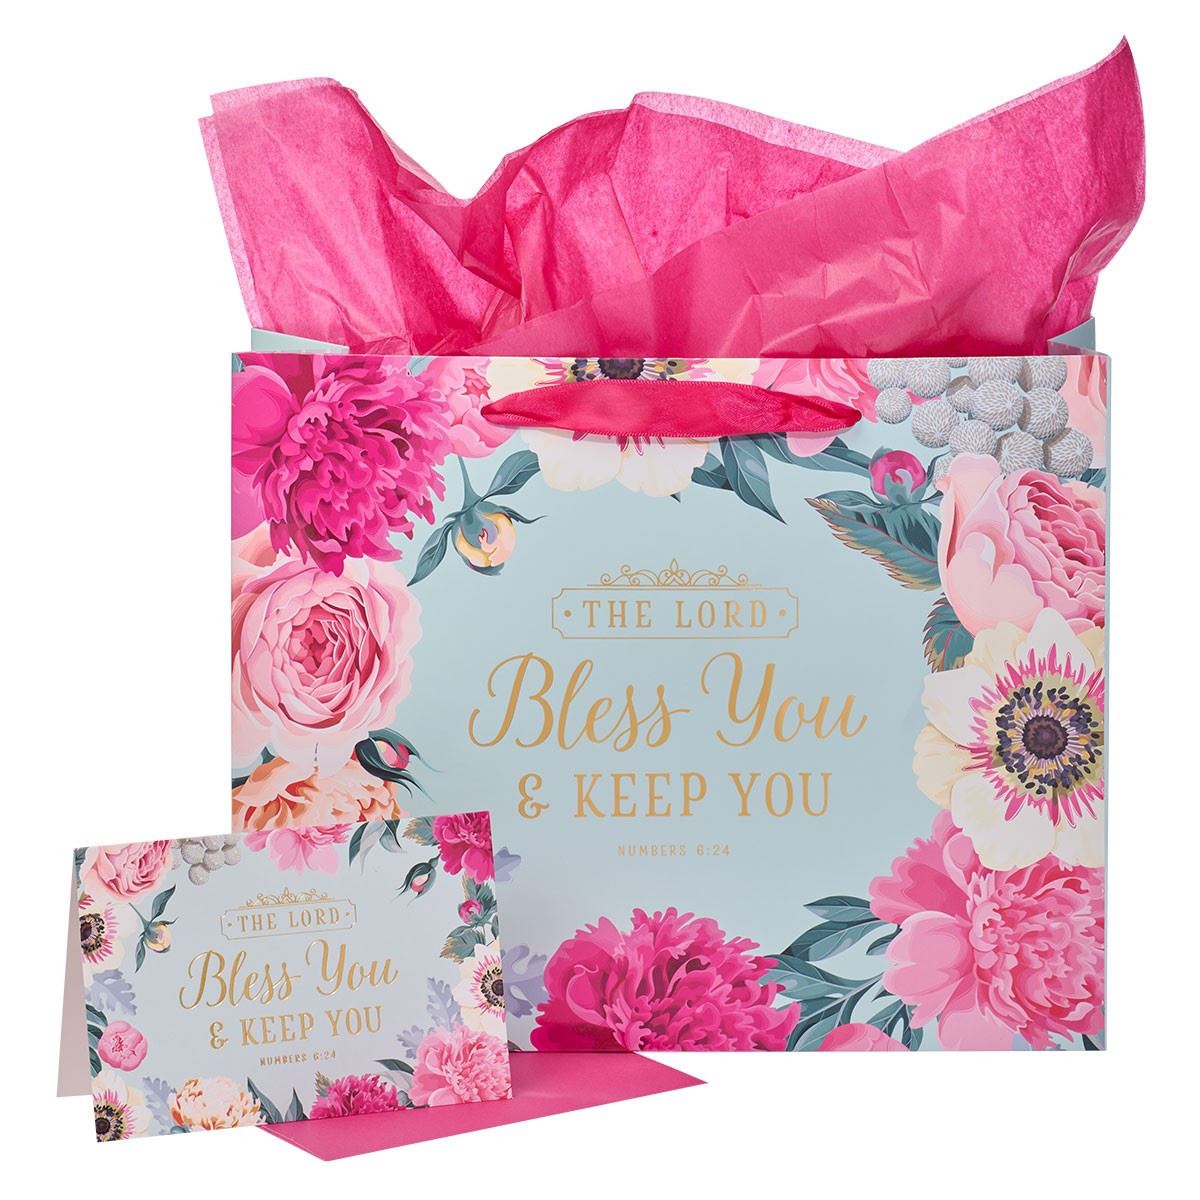 The Lord Bless and Keep You Large Gift Bag